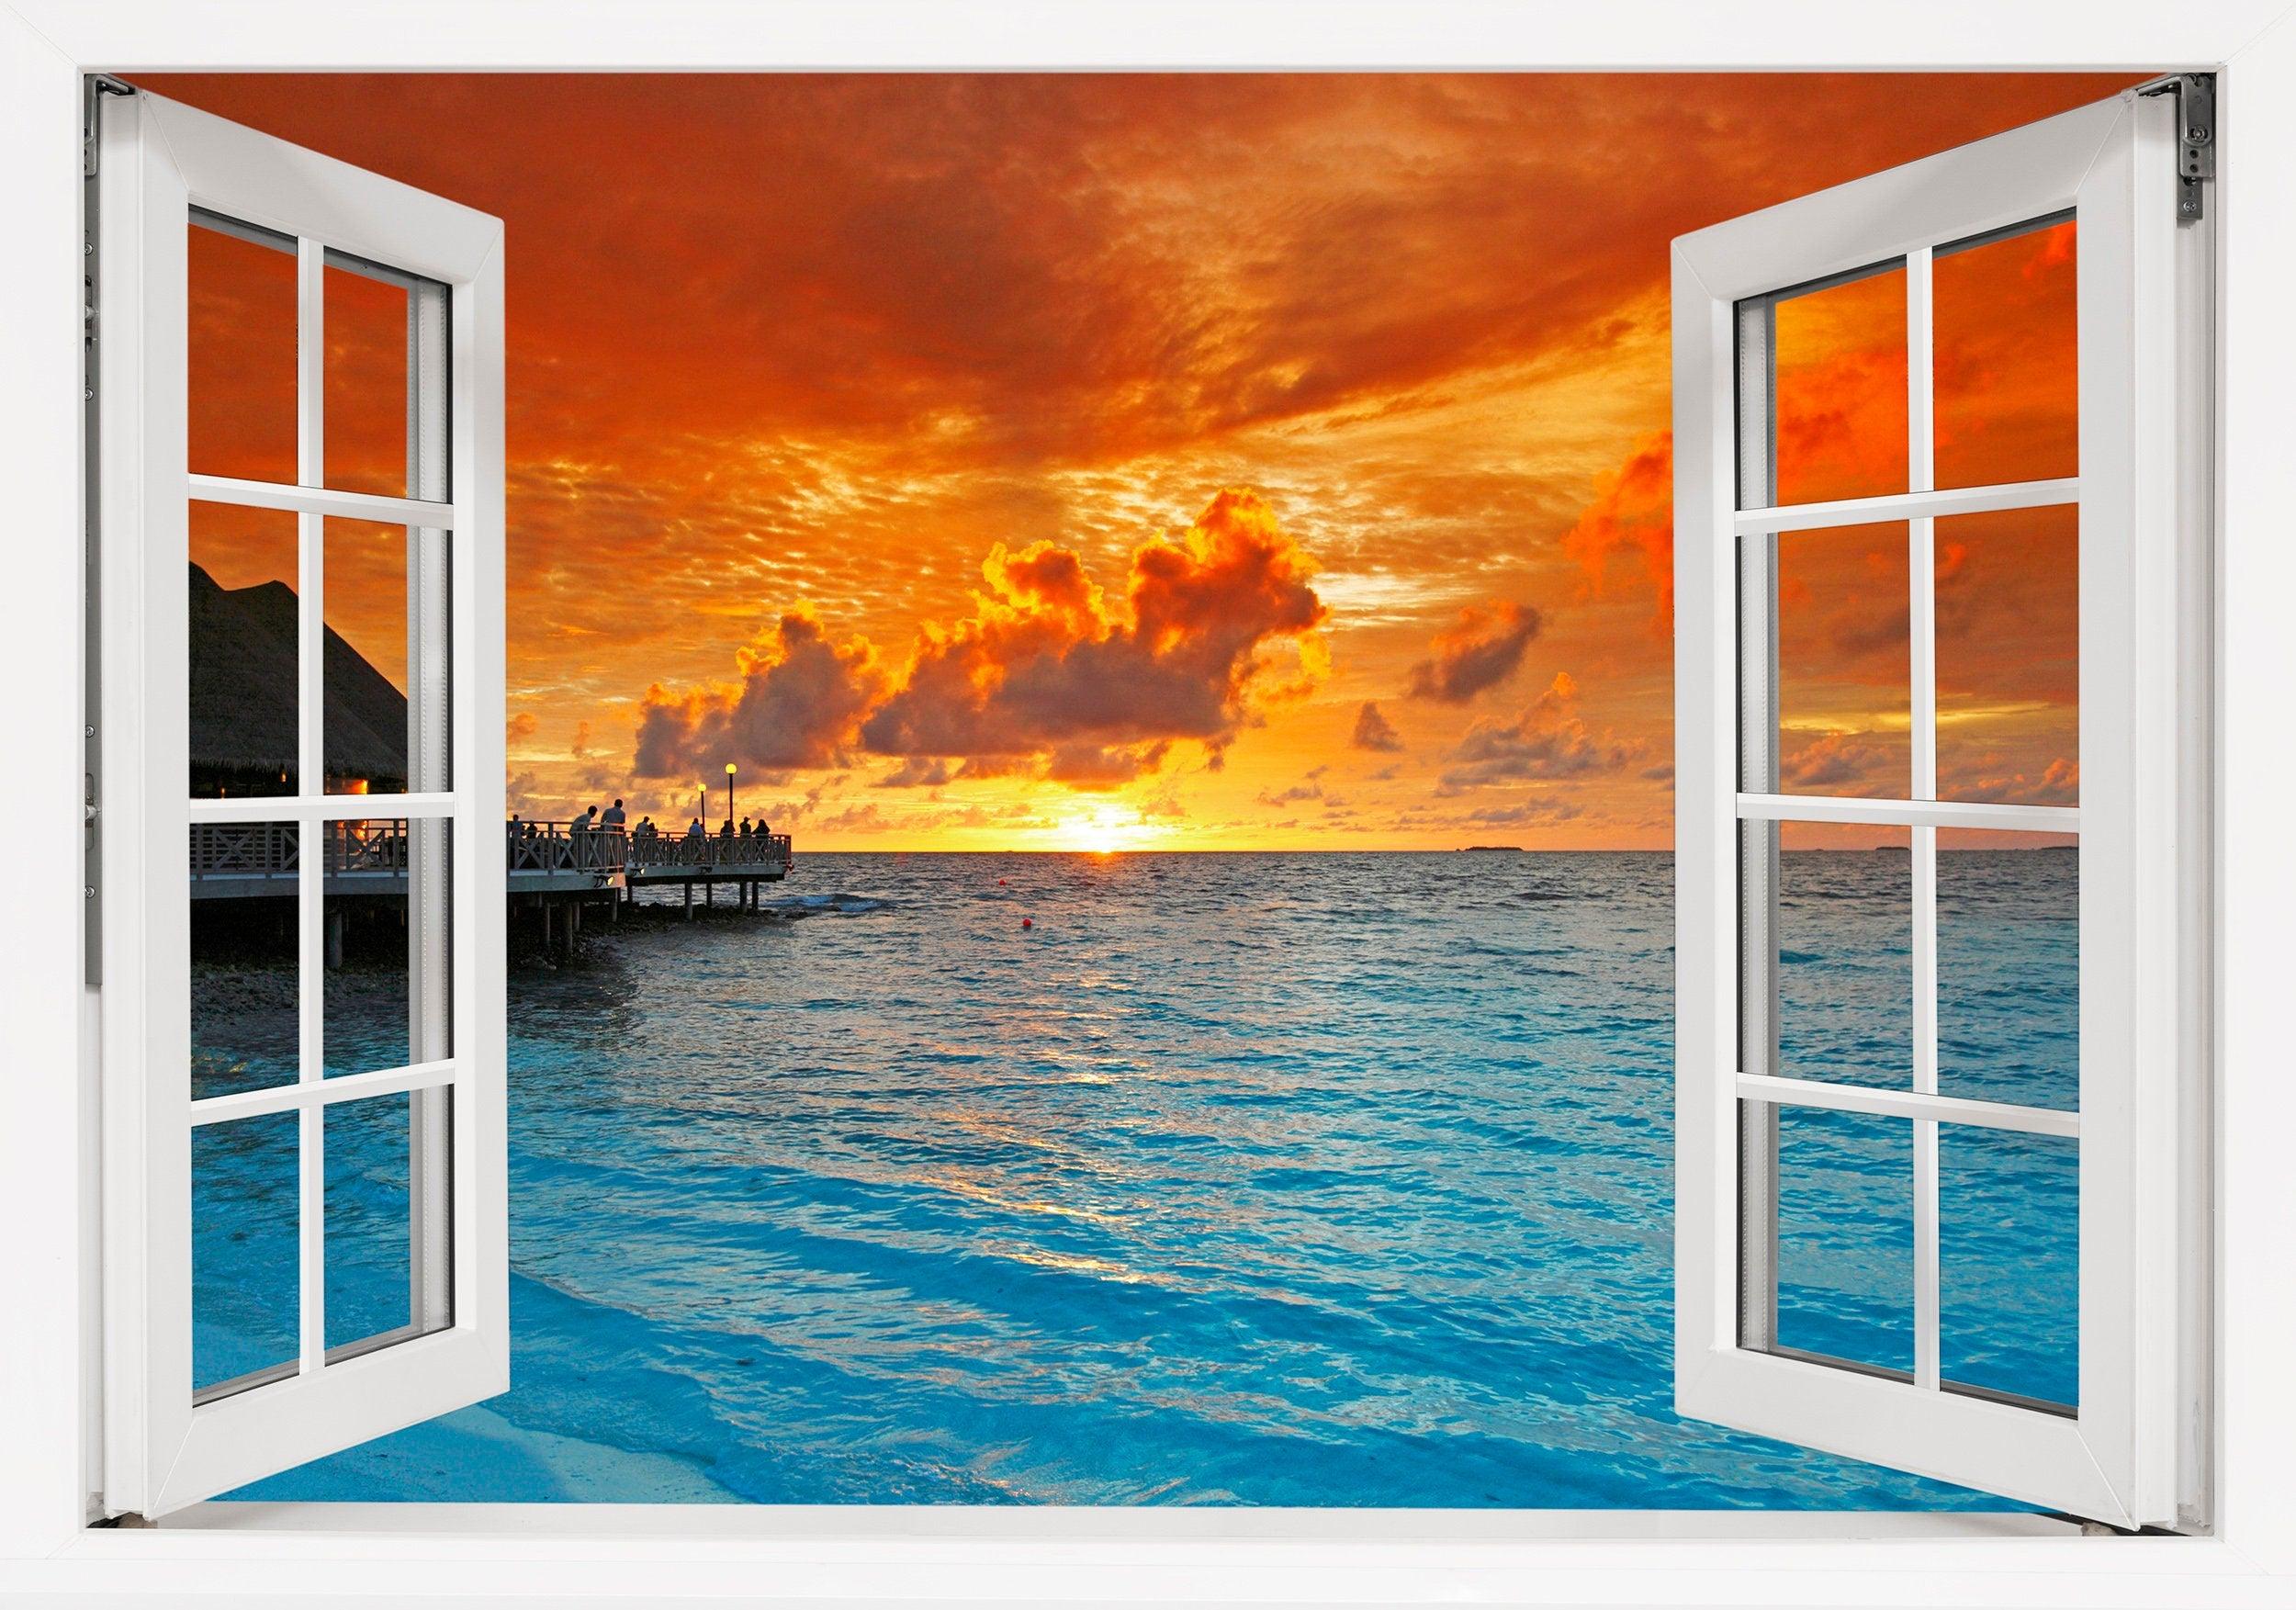 Window Scape Sunset over Pier #24, Window Decal, Sticker Sunset, Removable, Fabric, Window Frame, Office,Bedroom, 3D